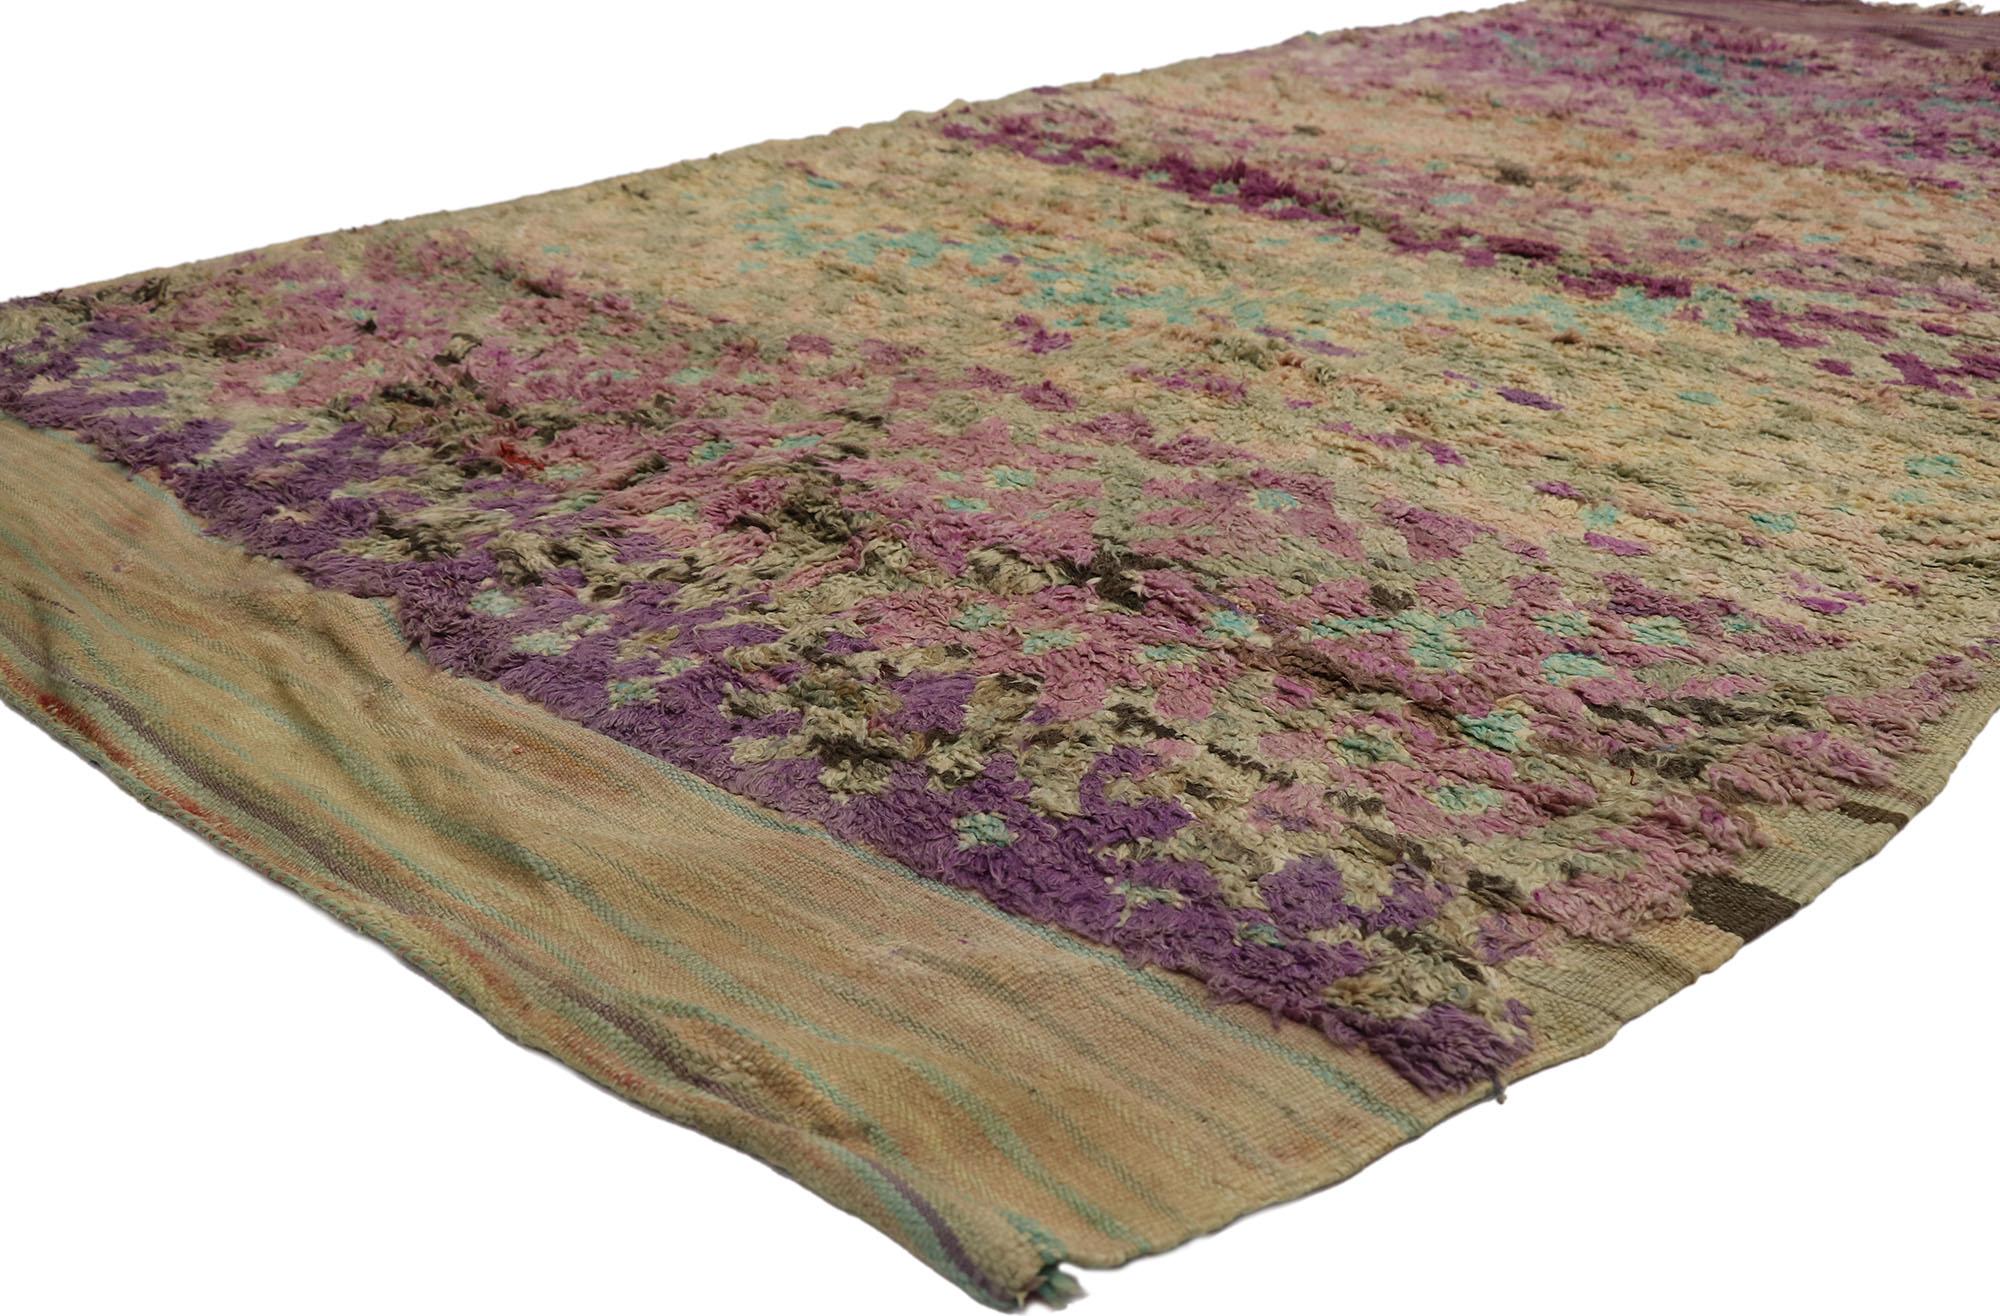 21281 Vintage Purple Talsint Moroccan Rug, 05'08 x 08'07. Talsint Moroccan rugs, originating from the Figuig region of Aït Bou Ichaouen in eastern Morocco, particularly the remote Atlas Mountains, are esteemed for their traditional Berber